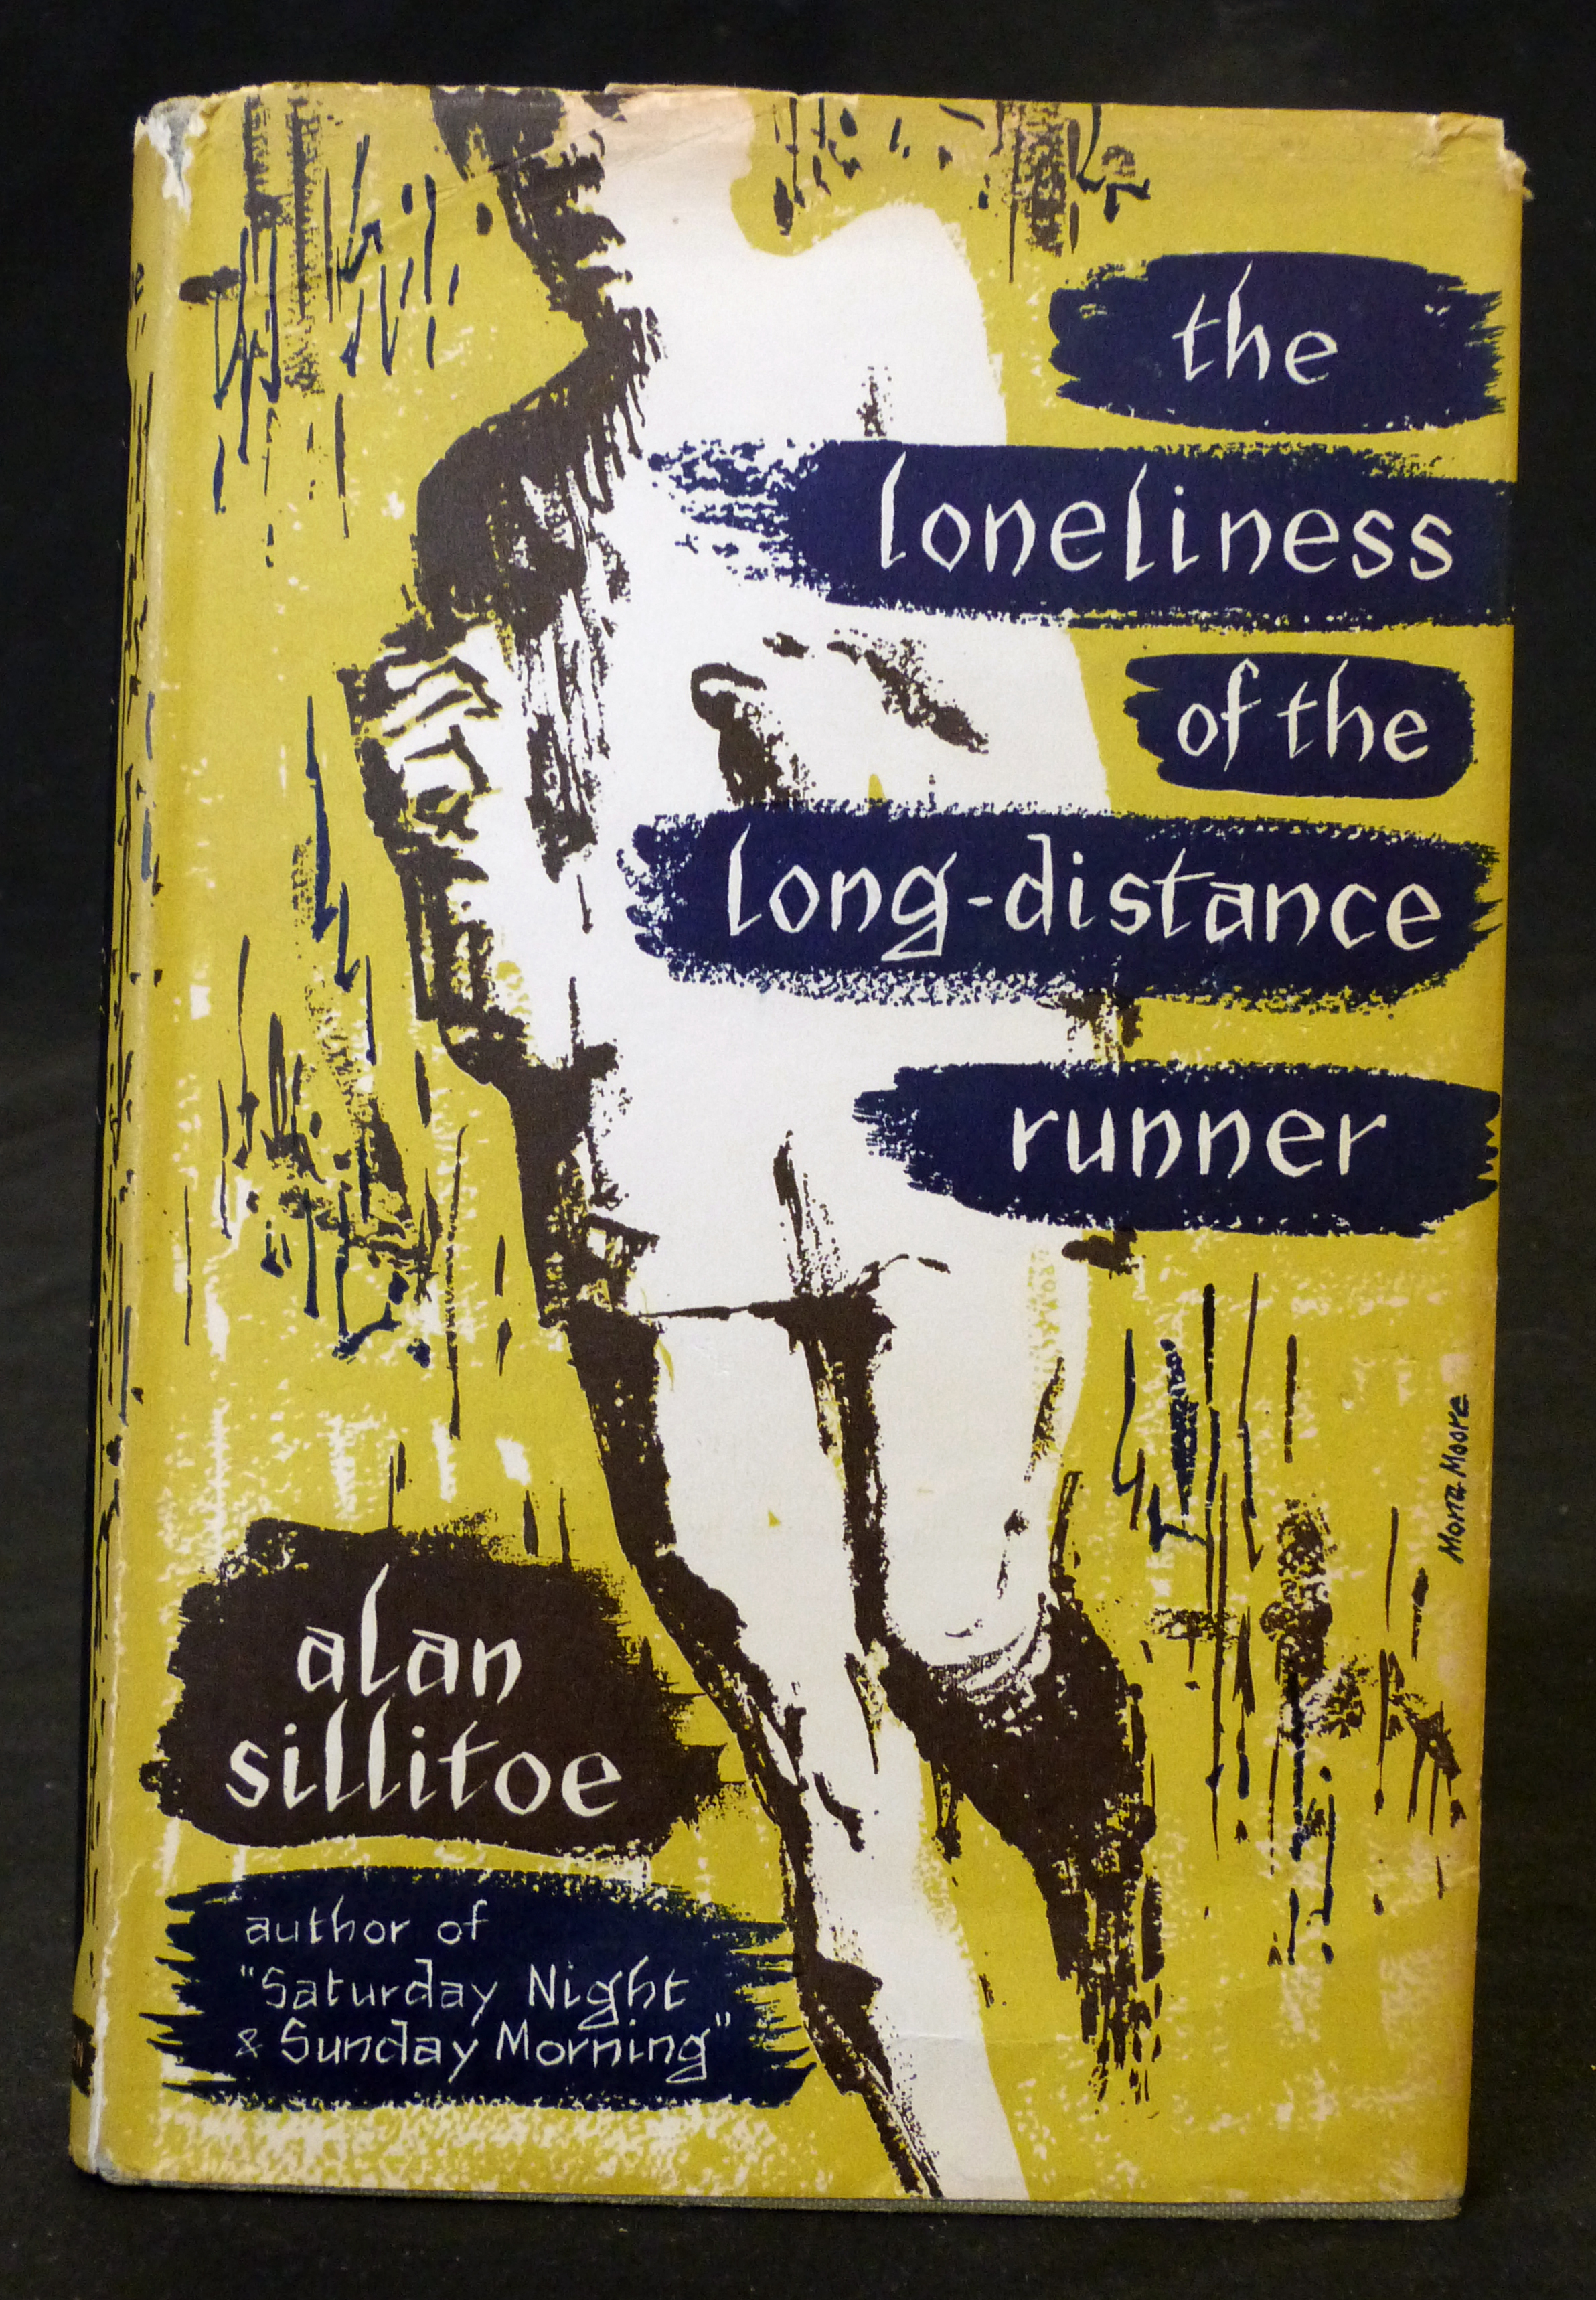 ALAN SILLITOE: THE LONELINESS OF THE LONG-DISTANCE RUNNER, London, W H Allen, 1959, 1st edition,